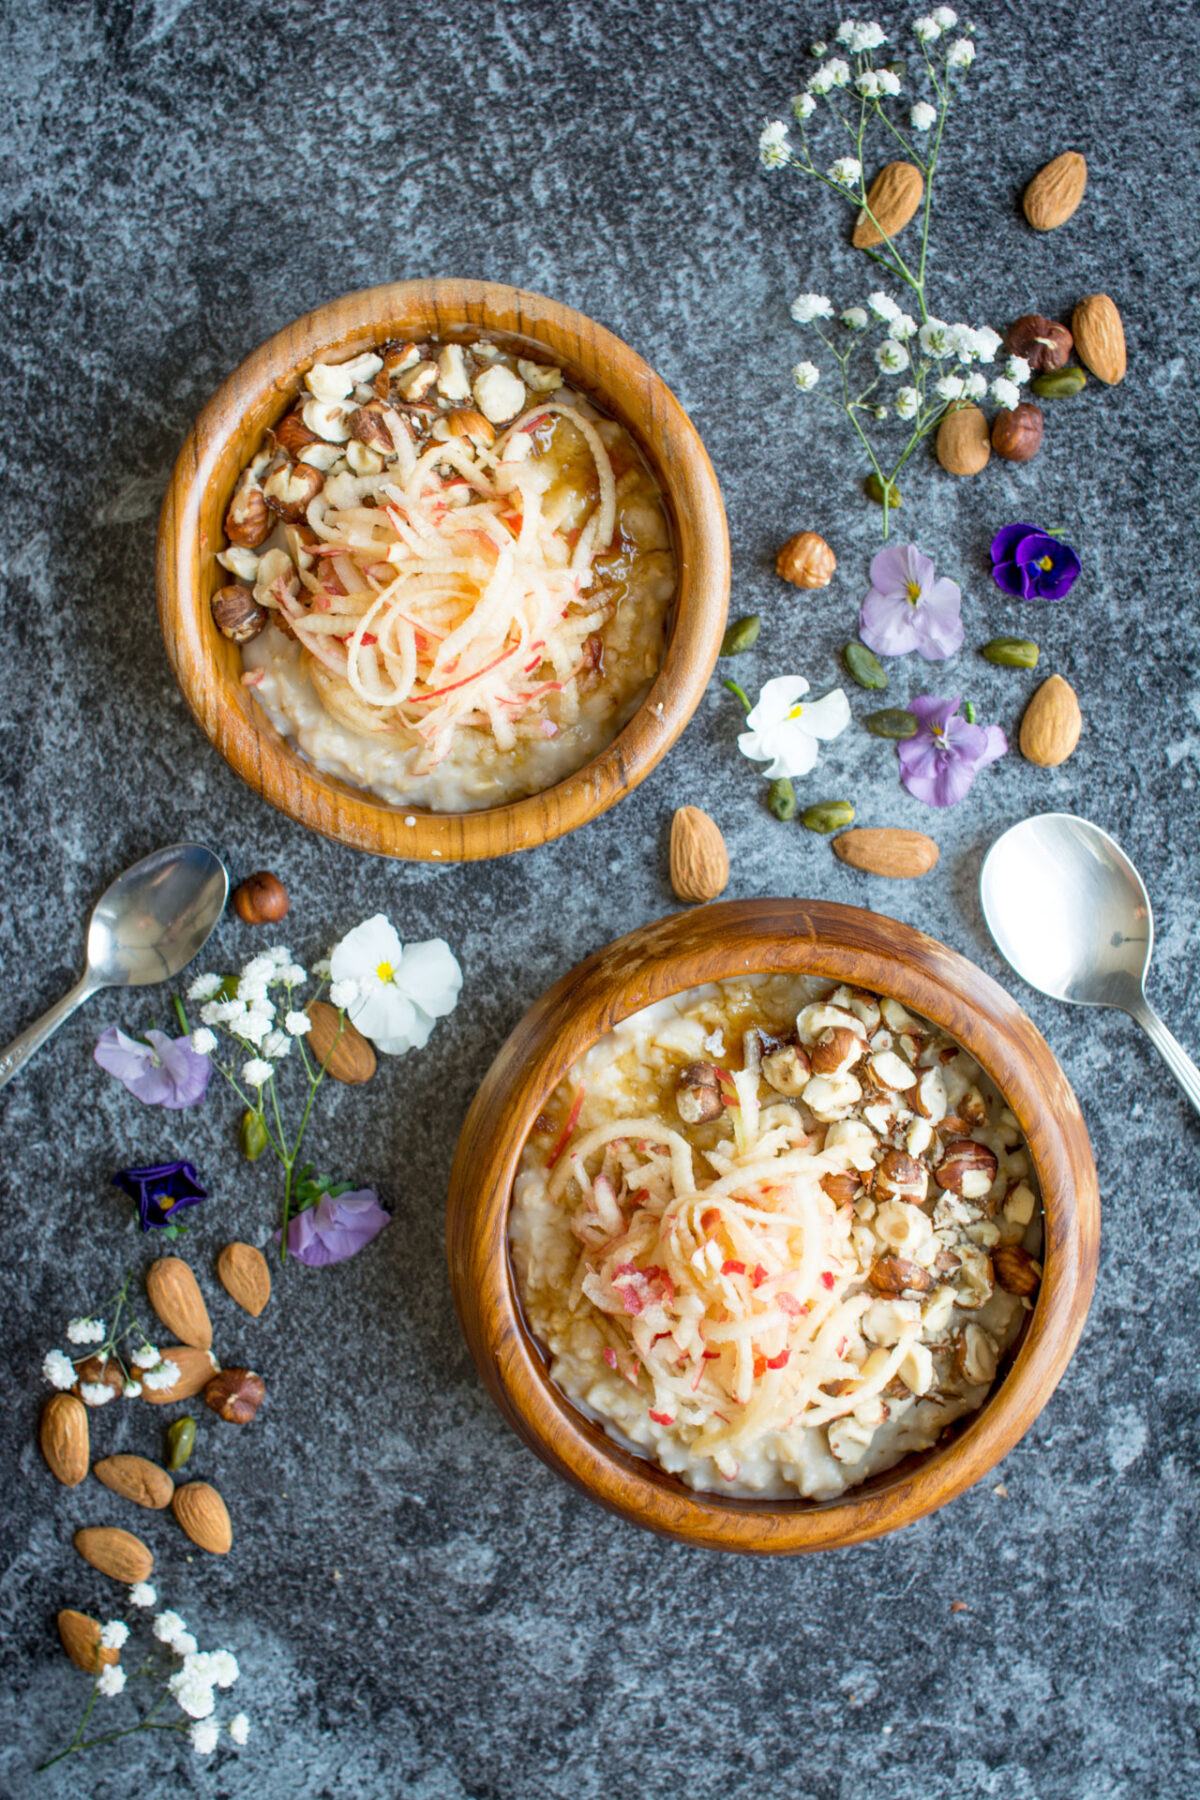 Top-down view of two wooden bowls containing creamy oatmeal, adorned with grated apple, toasted hazelnuts, and a sprinkle of sweet brown sugar.